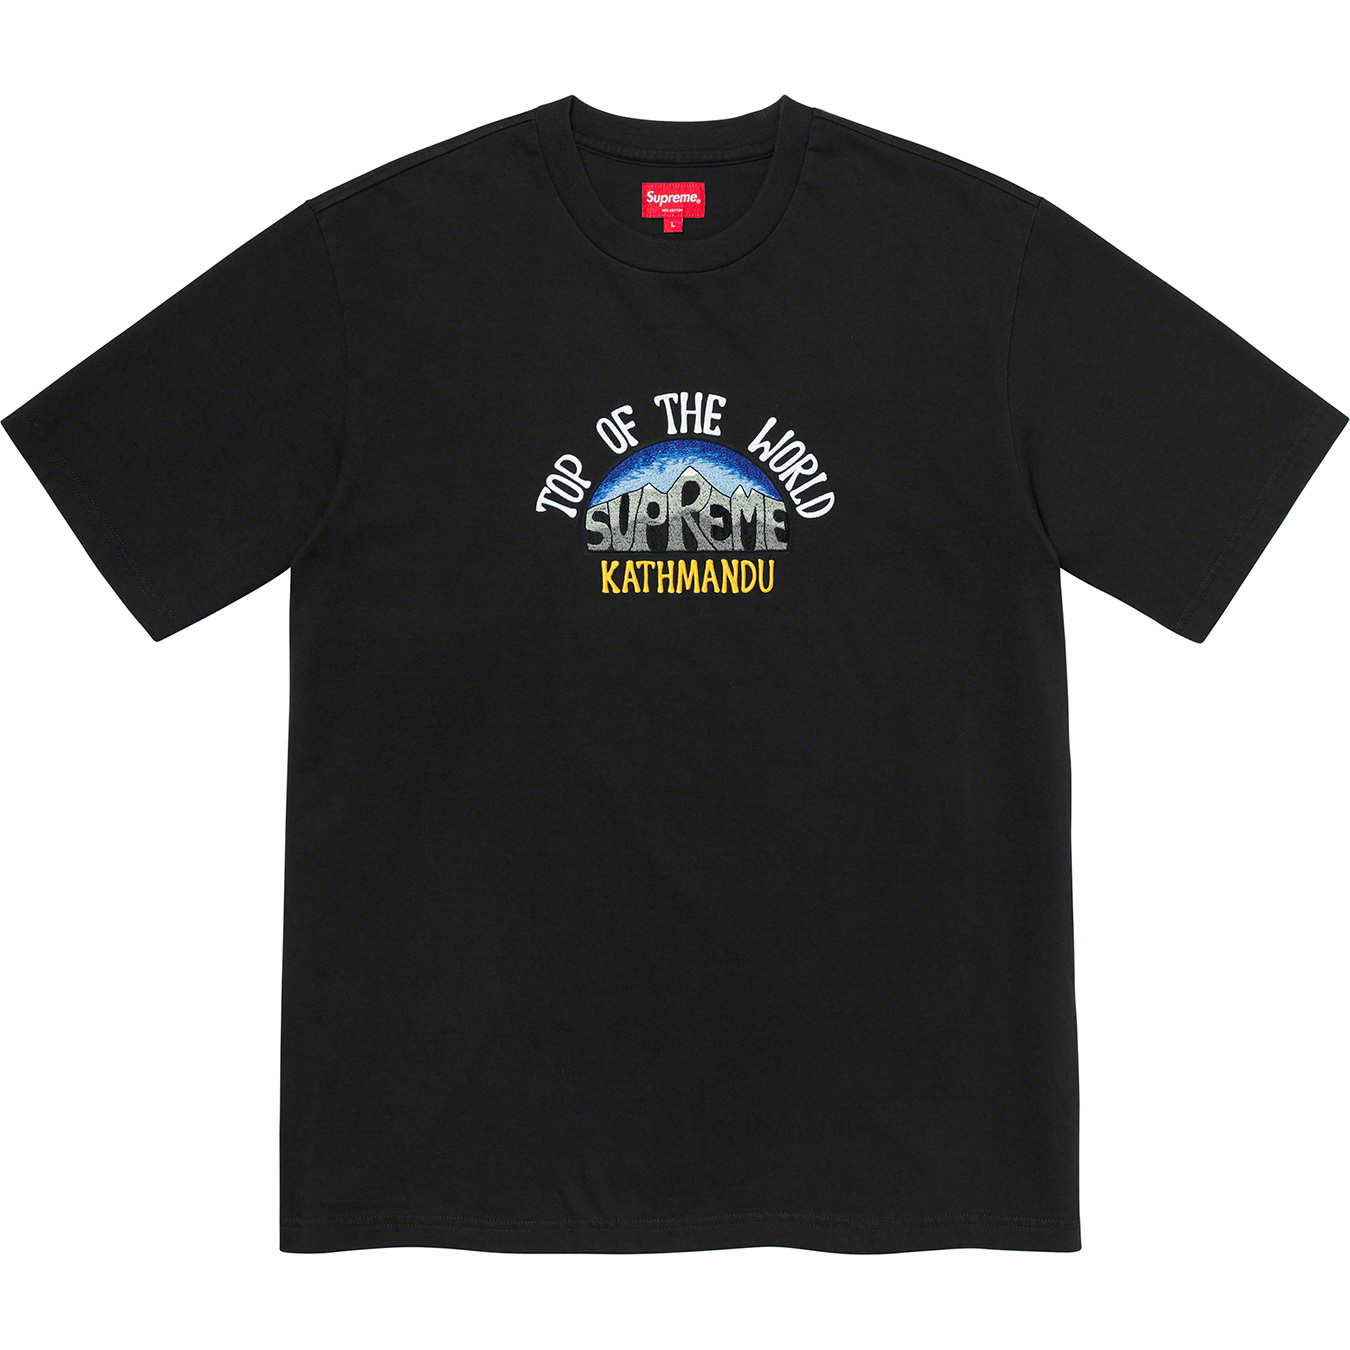 Top of the World S S Top - spring summer 2020 - Supreme